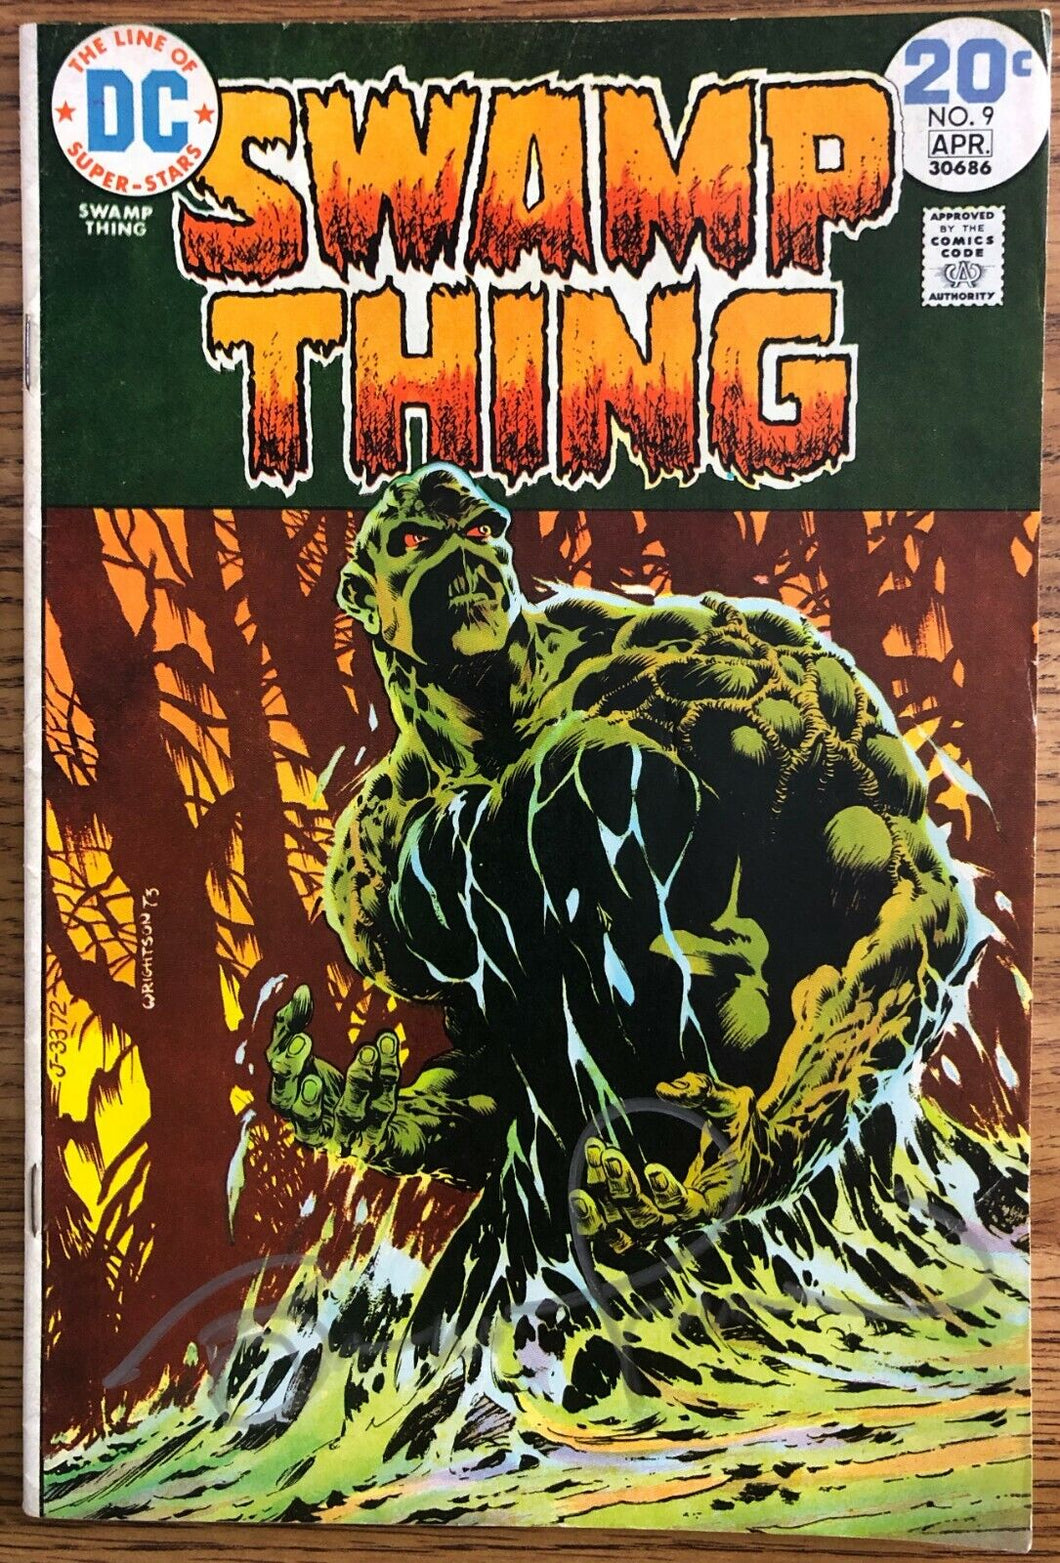 Swamp Thing #9 (DC,1974) Signed by Bernie Wrightson in Silver Sharpie